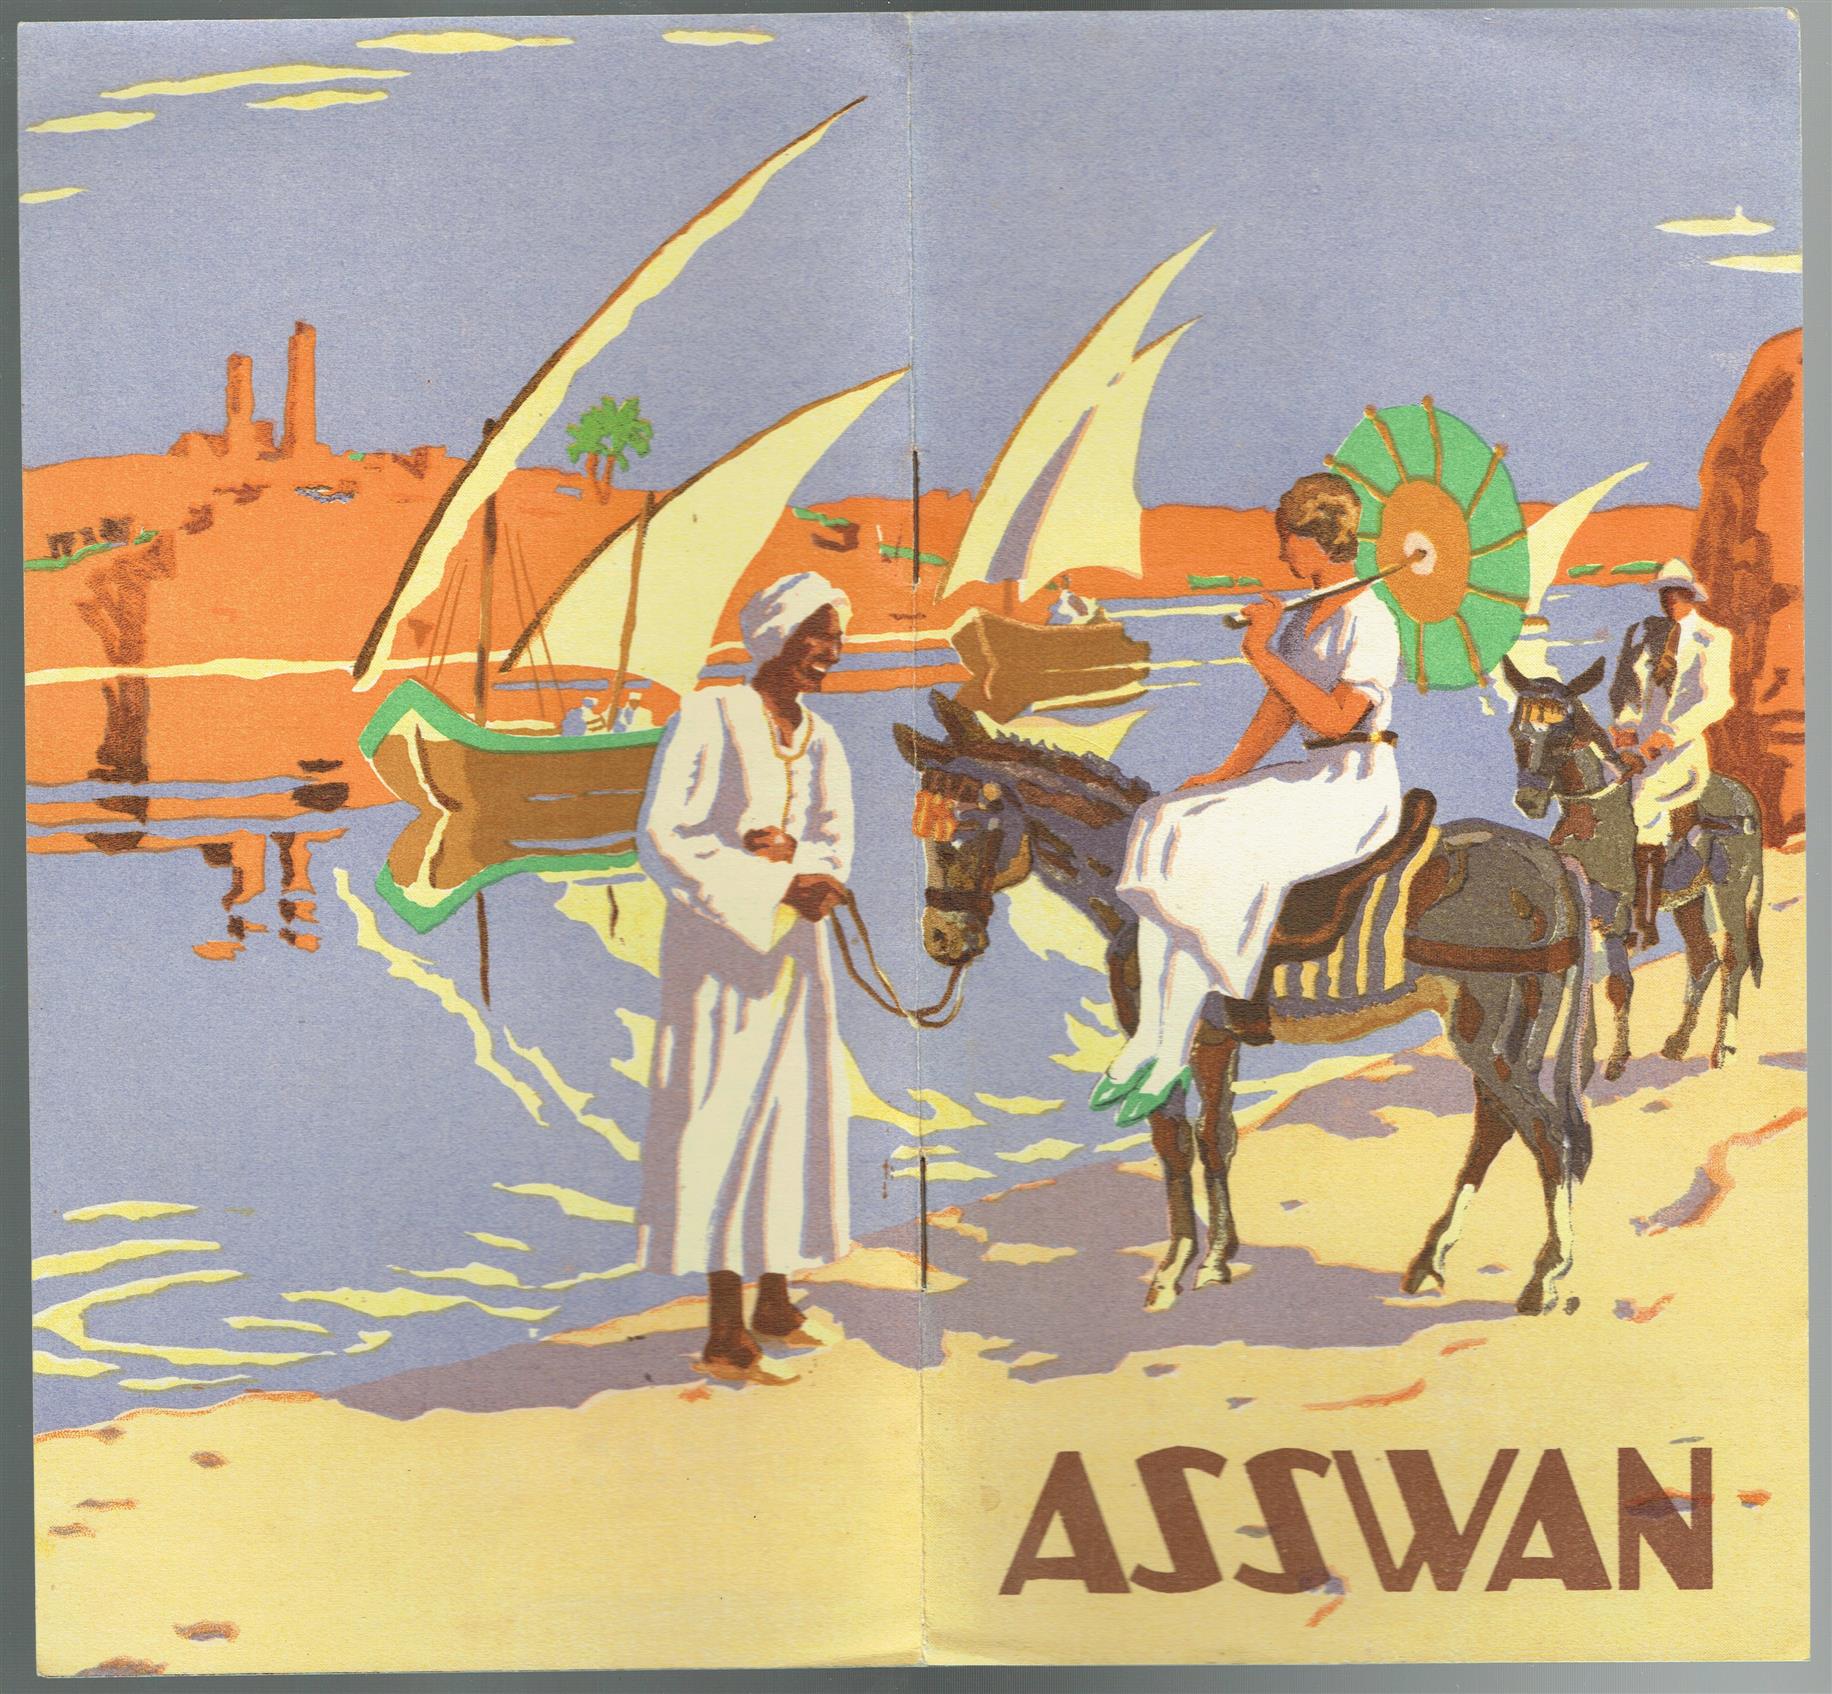 n.n - (TOERISTEN) ASSWAN., Egypt. Tourists bruchure with very nice graphics.